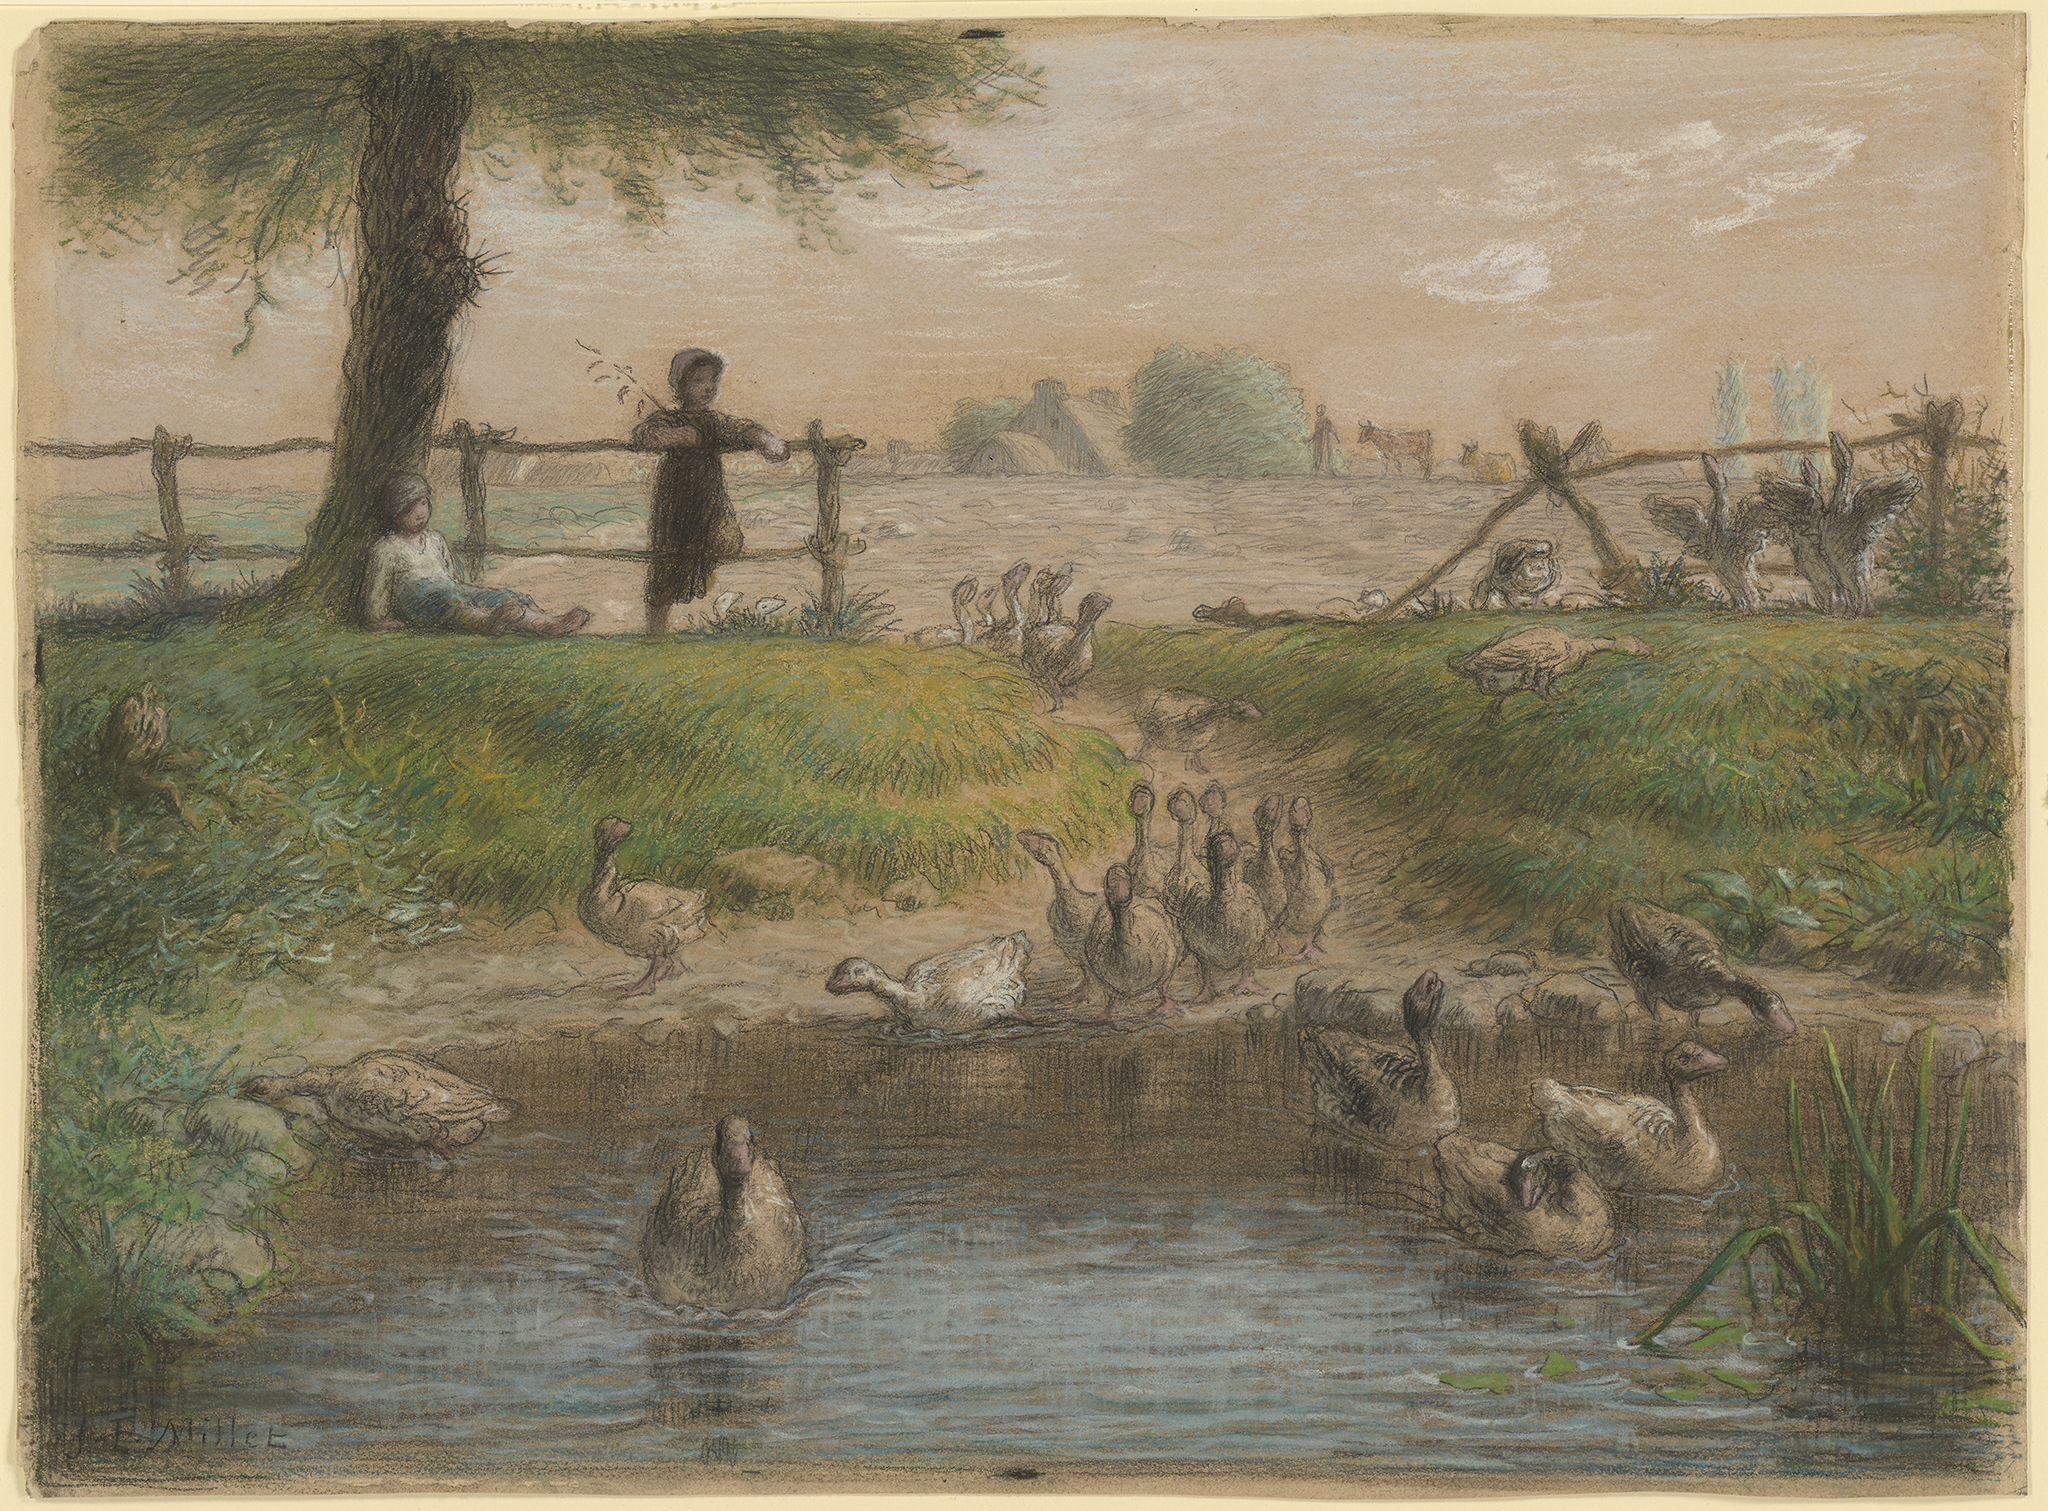 A sketching a gaggle of geese marching along a dirt path into a reflective pond. On the left side of the sketch, a child lays against a tree while other leans on a wooden fence. In the background, there is a light brown field with a man standing near two cattle. Behind that seems to be a series of roofs from buildings.